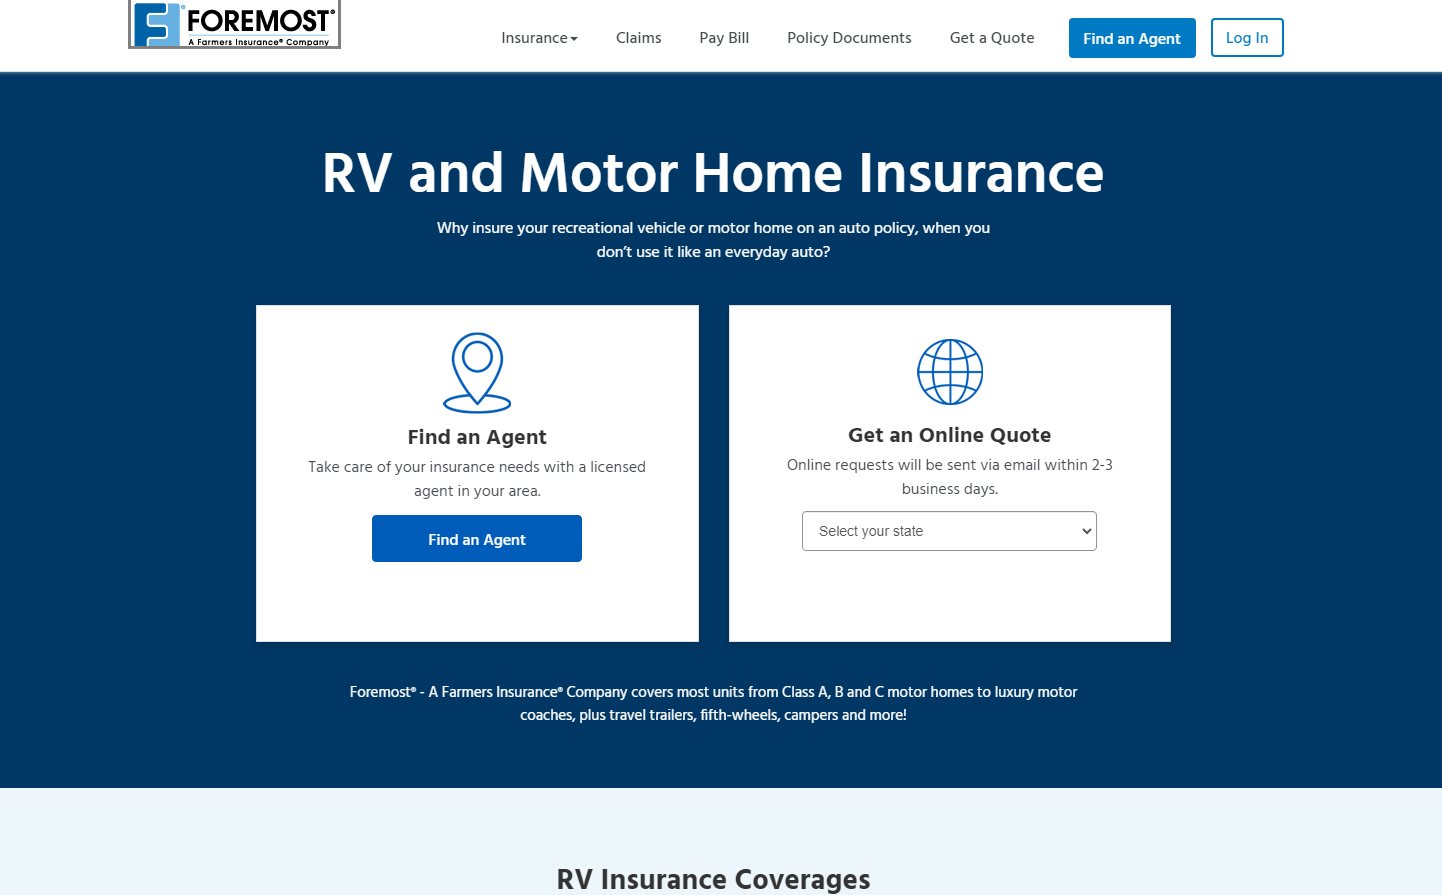 Foremost RV Insurance